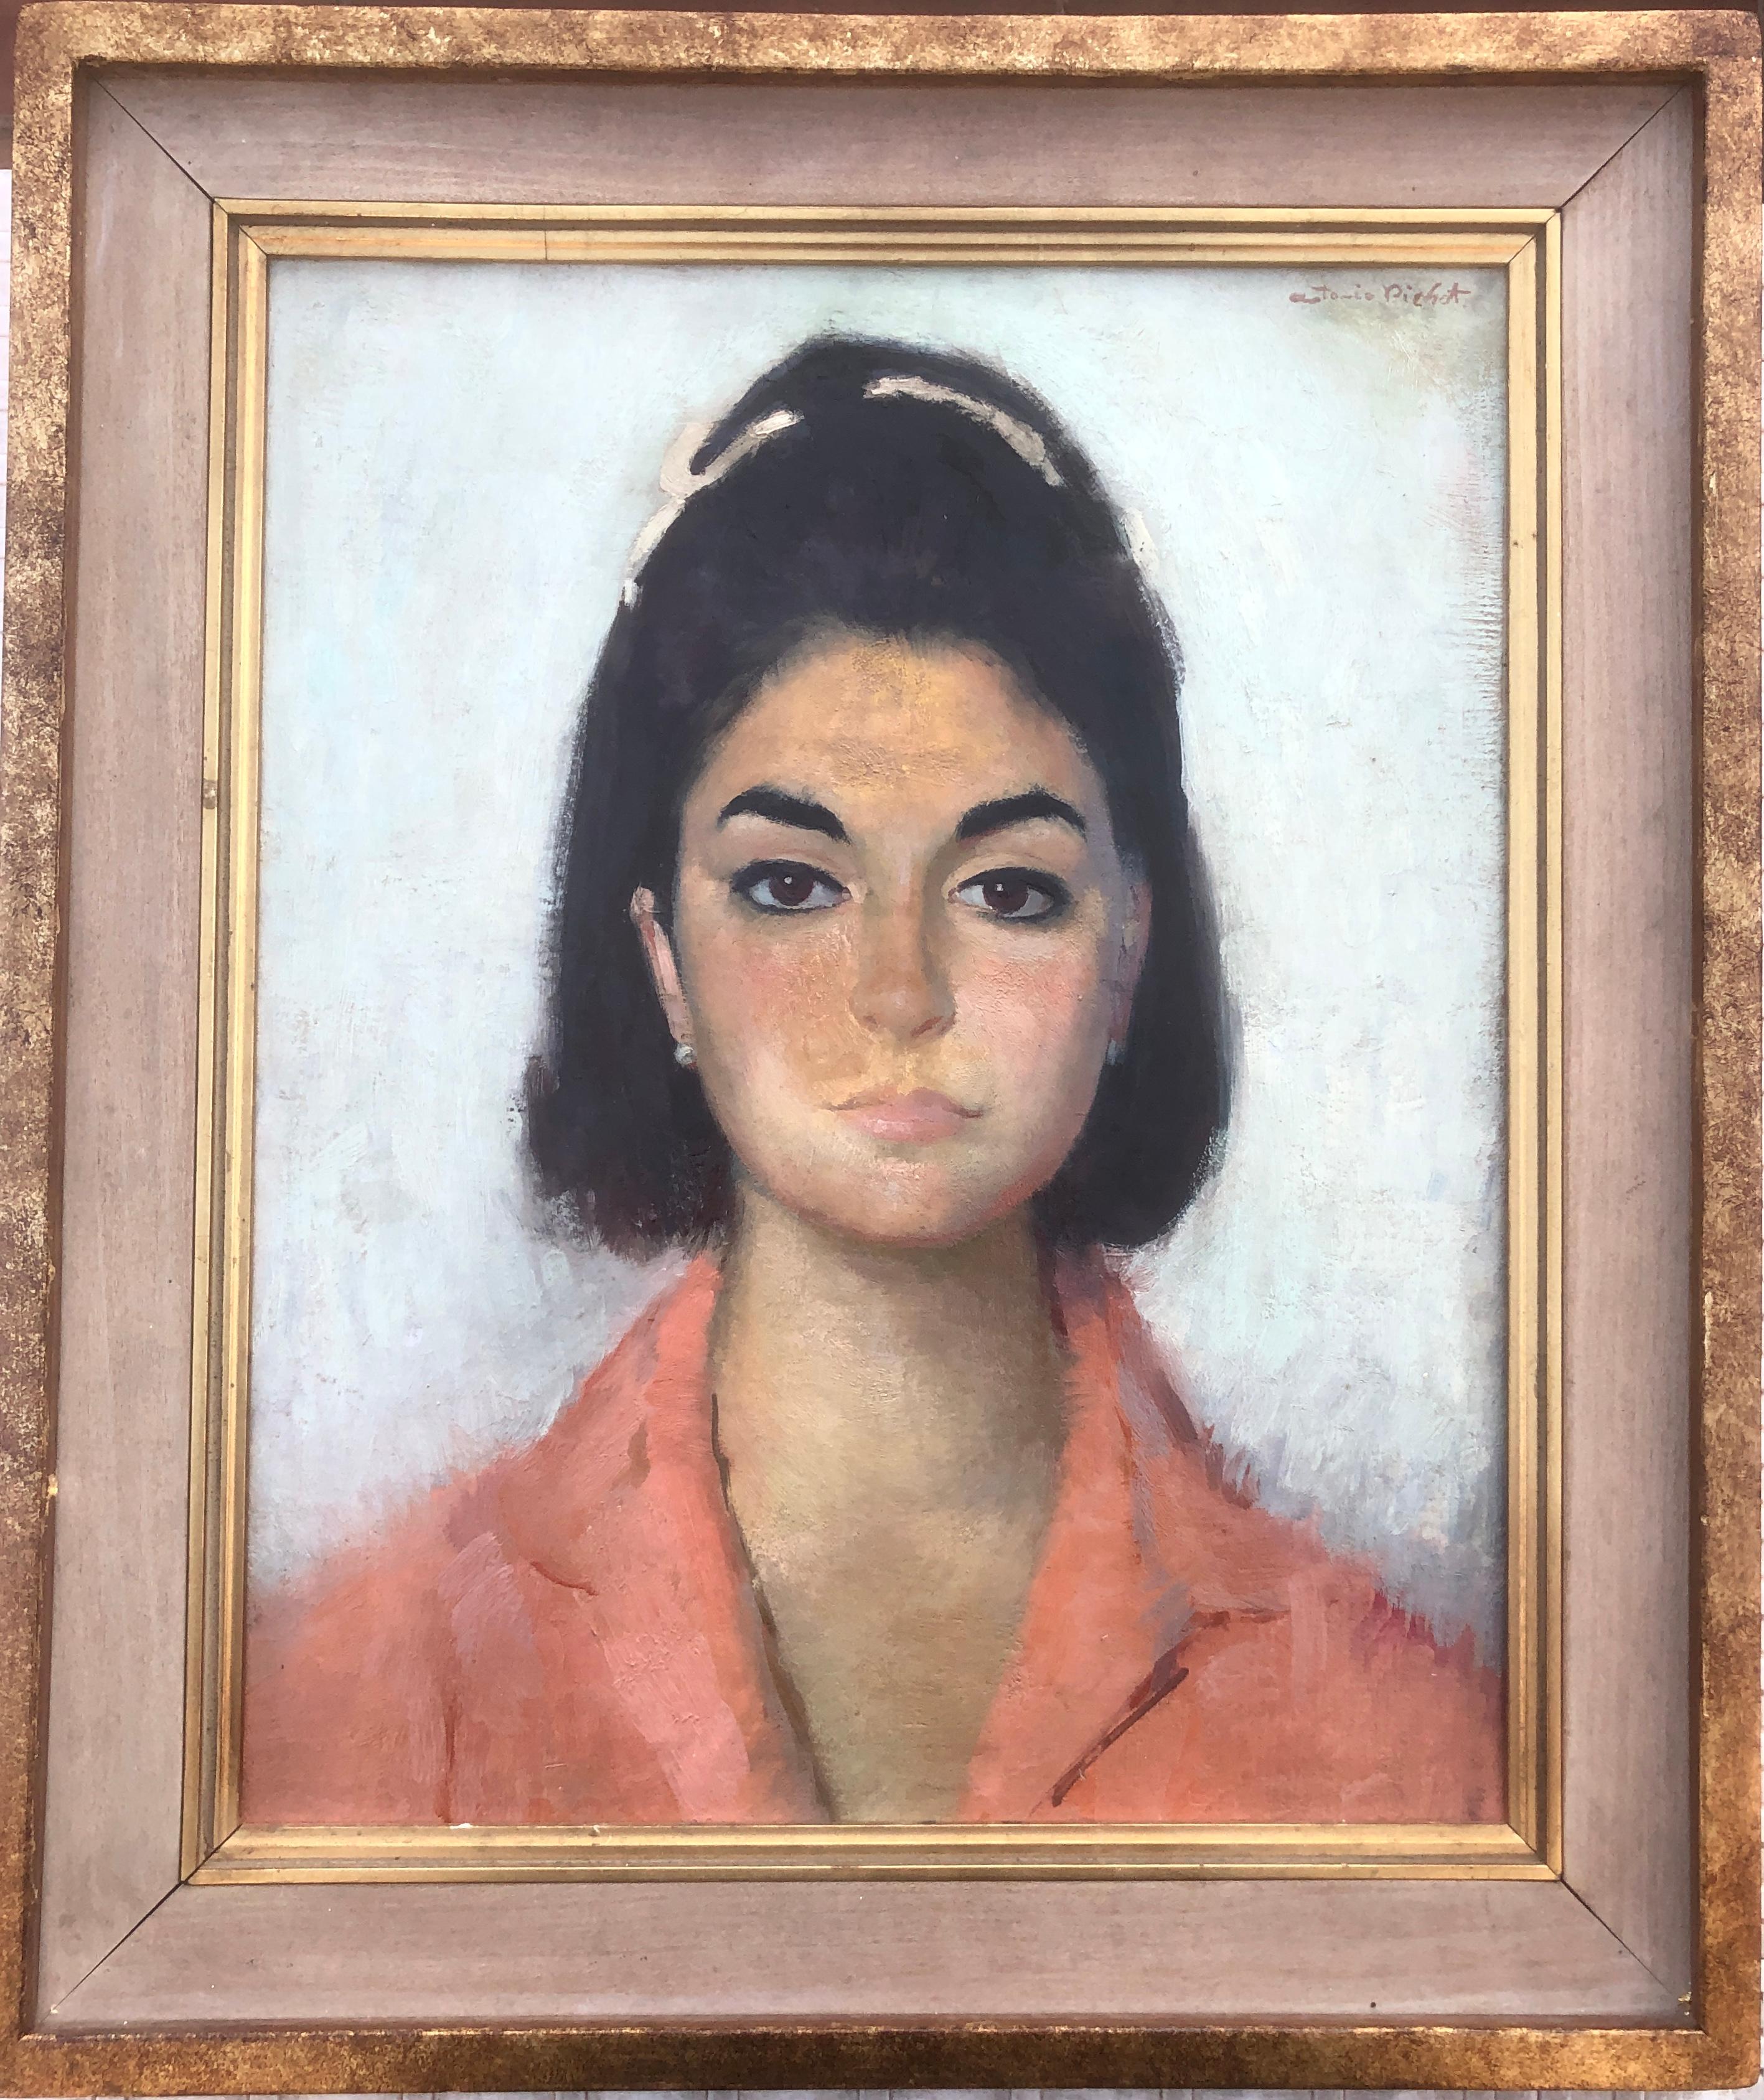 Woman portrait oil on canvas painting pitxot - Painting by Antoni Pitxot